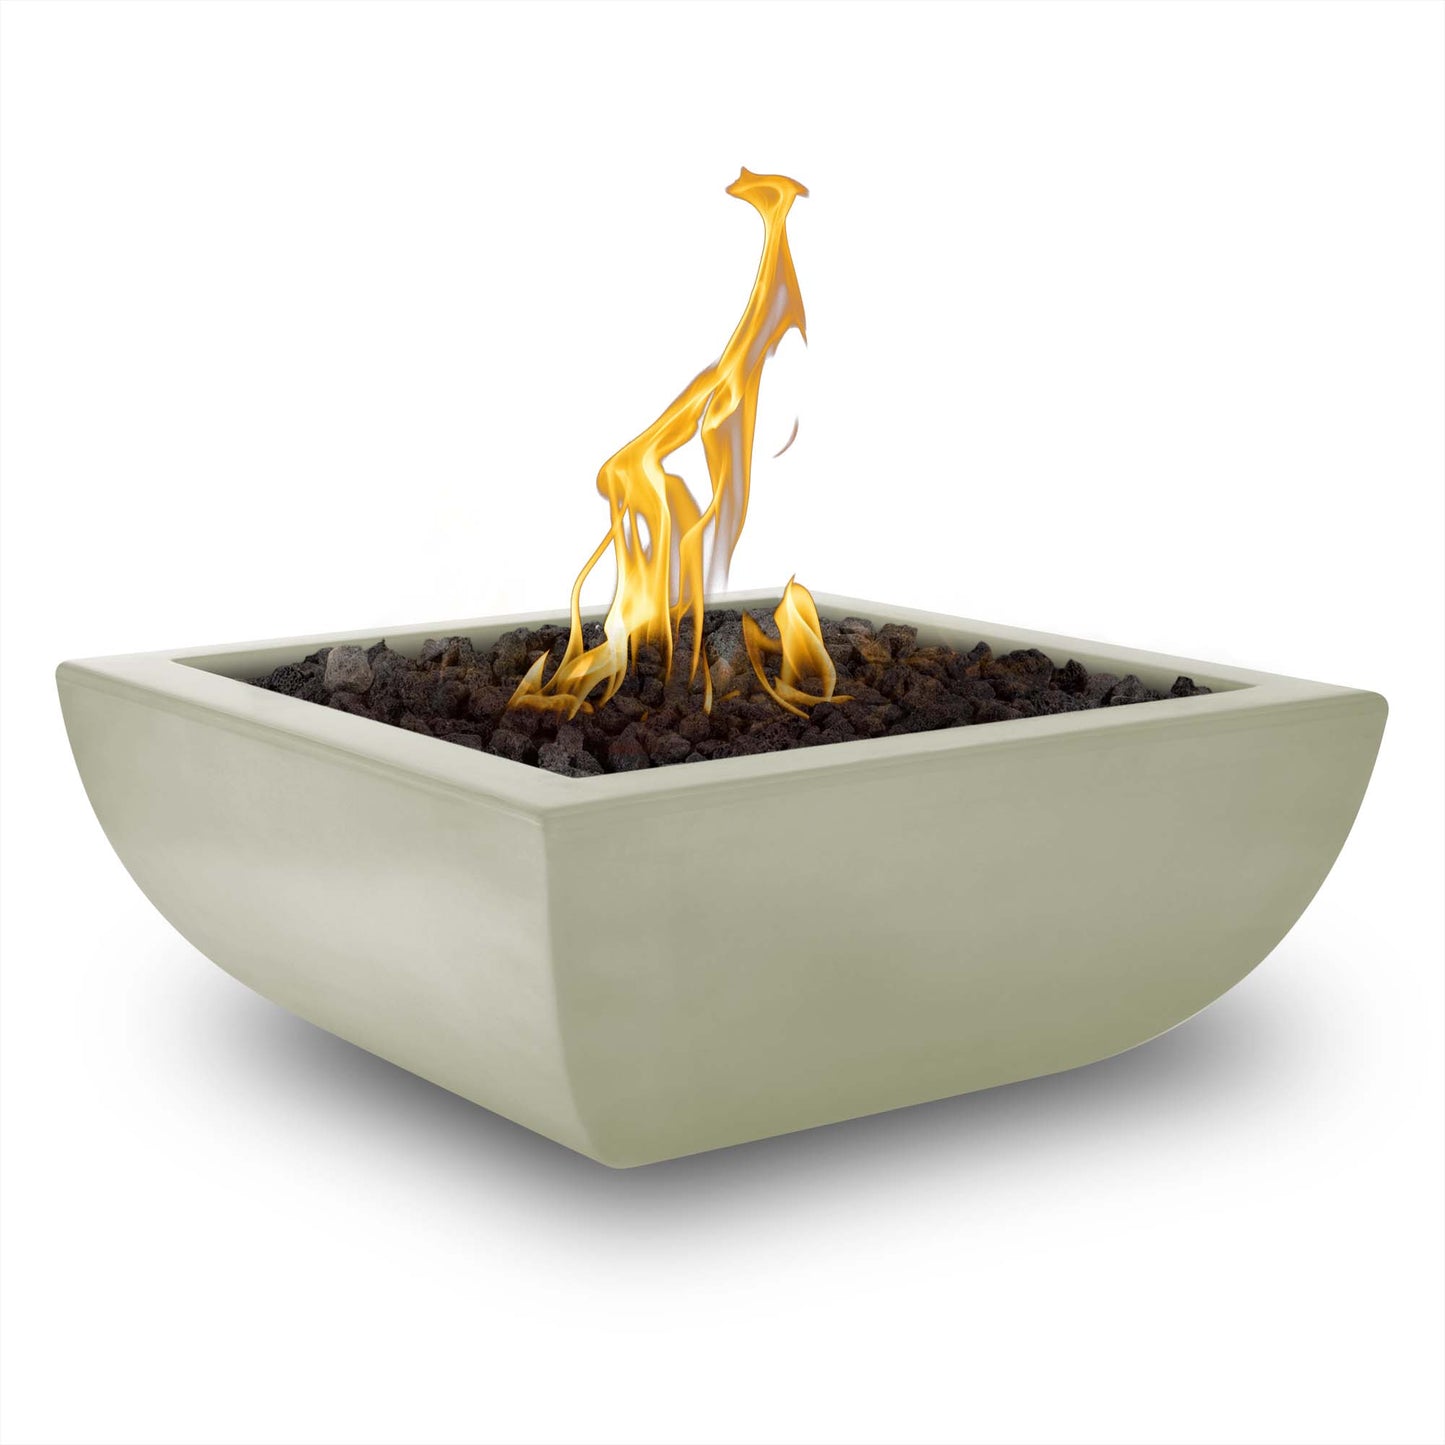 The Outdoor Plus Square Avalon 30" Gray GFRC Concrete Liquid Propane Fire Bowl with Match Lit with Flame Sense Ignition